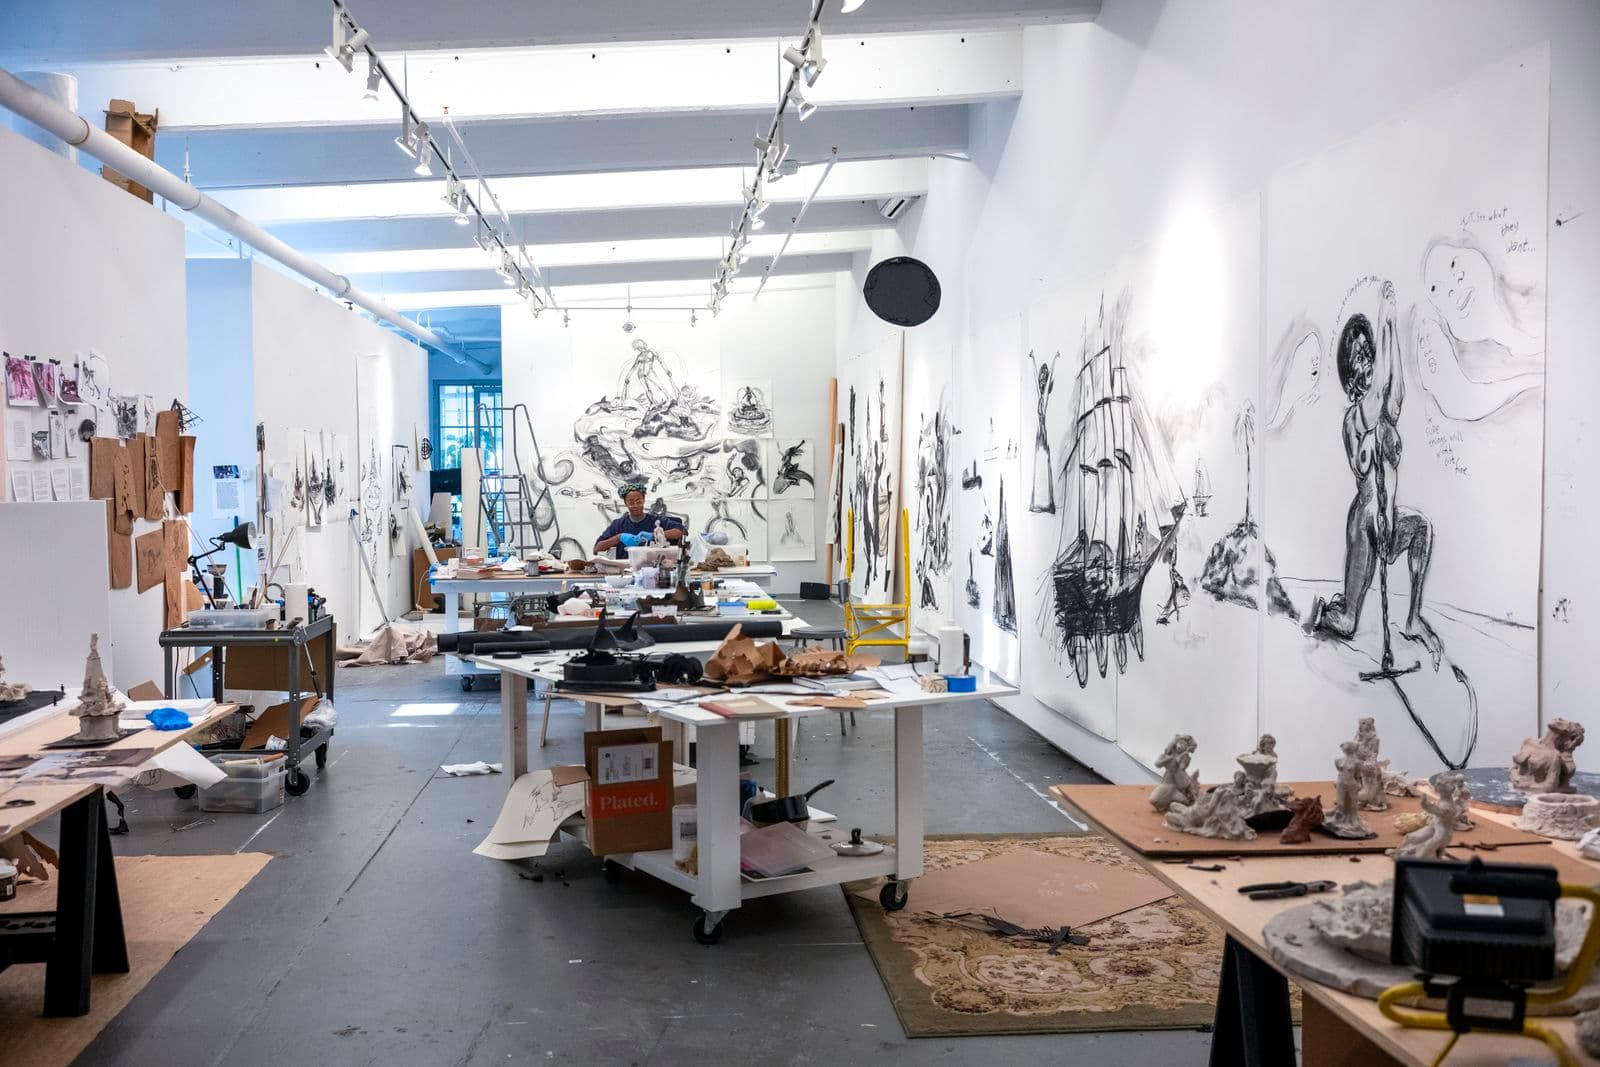 An artist's studio with works on paper pinned to the wall and tables of mixed media. An artist is working in the background with gloves handling clay.